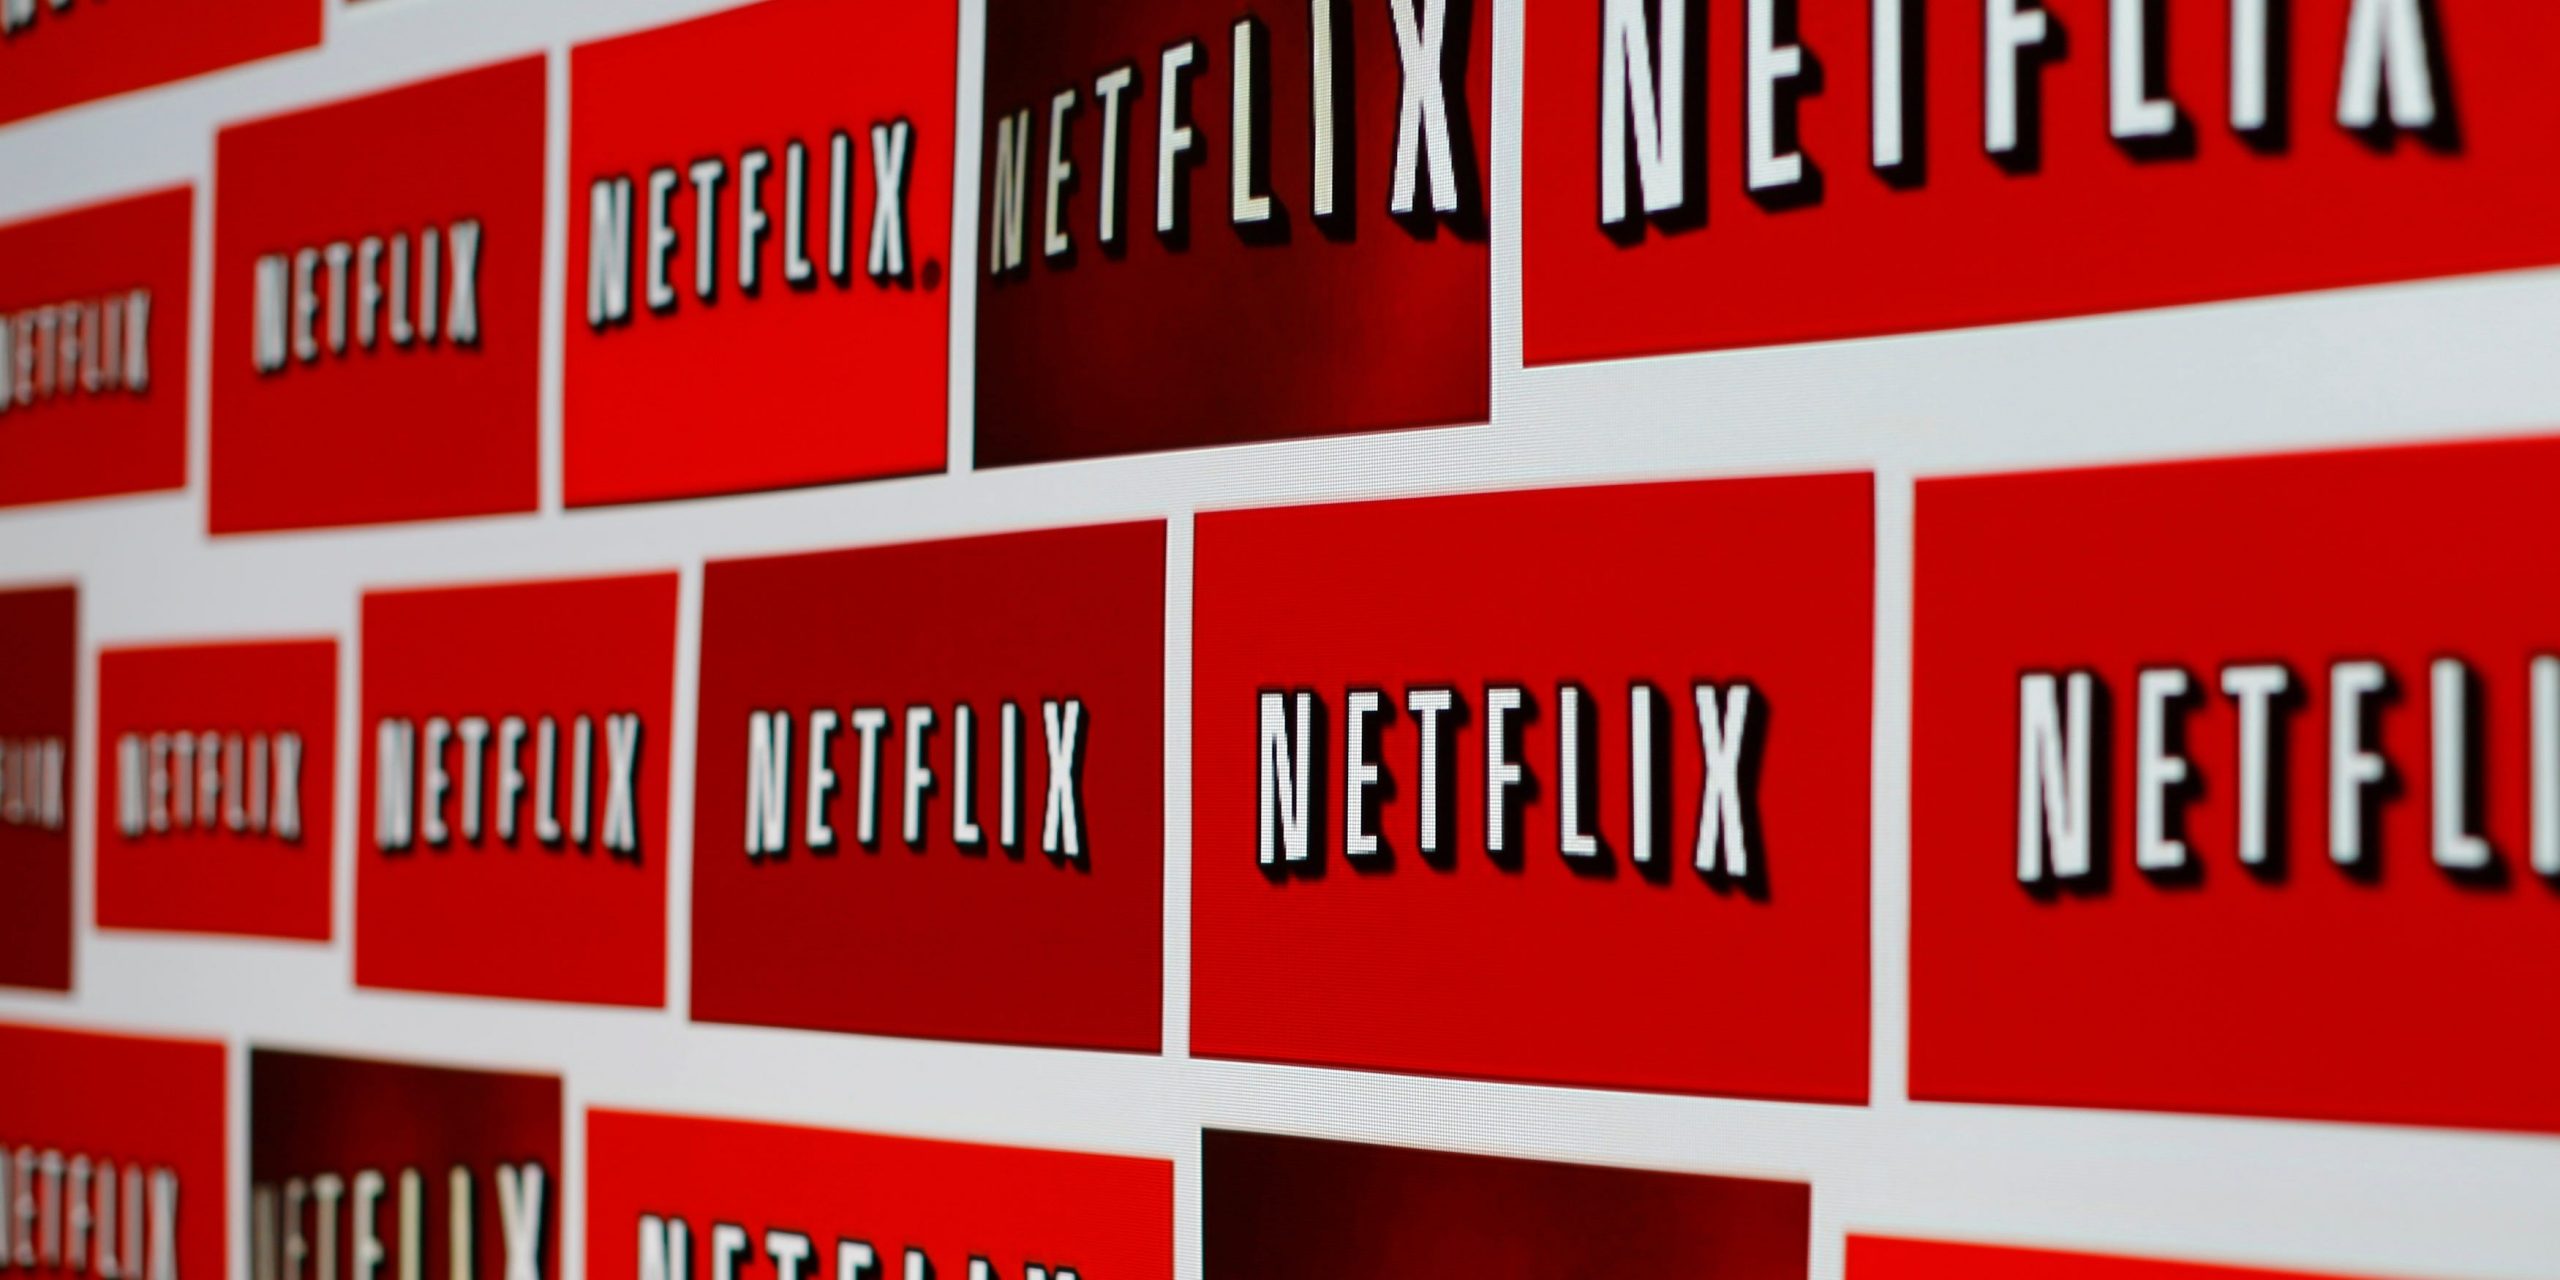 The Netflix logo is shown in this illustration photograph in Encinitas, California October 14, 2014. REUTERS/Mike Blake 